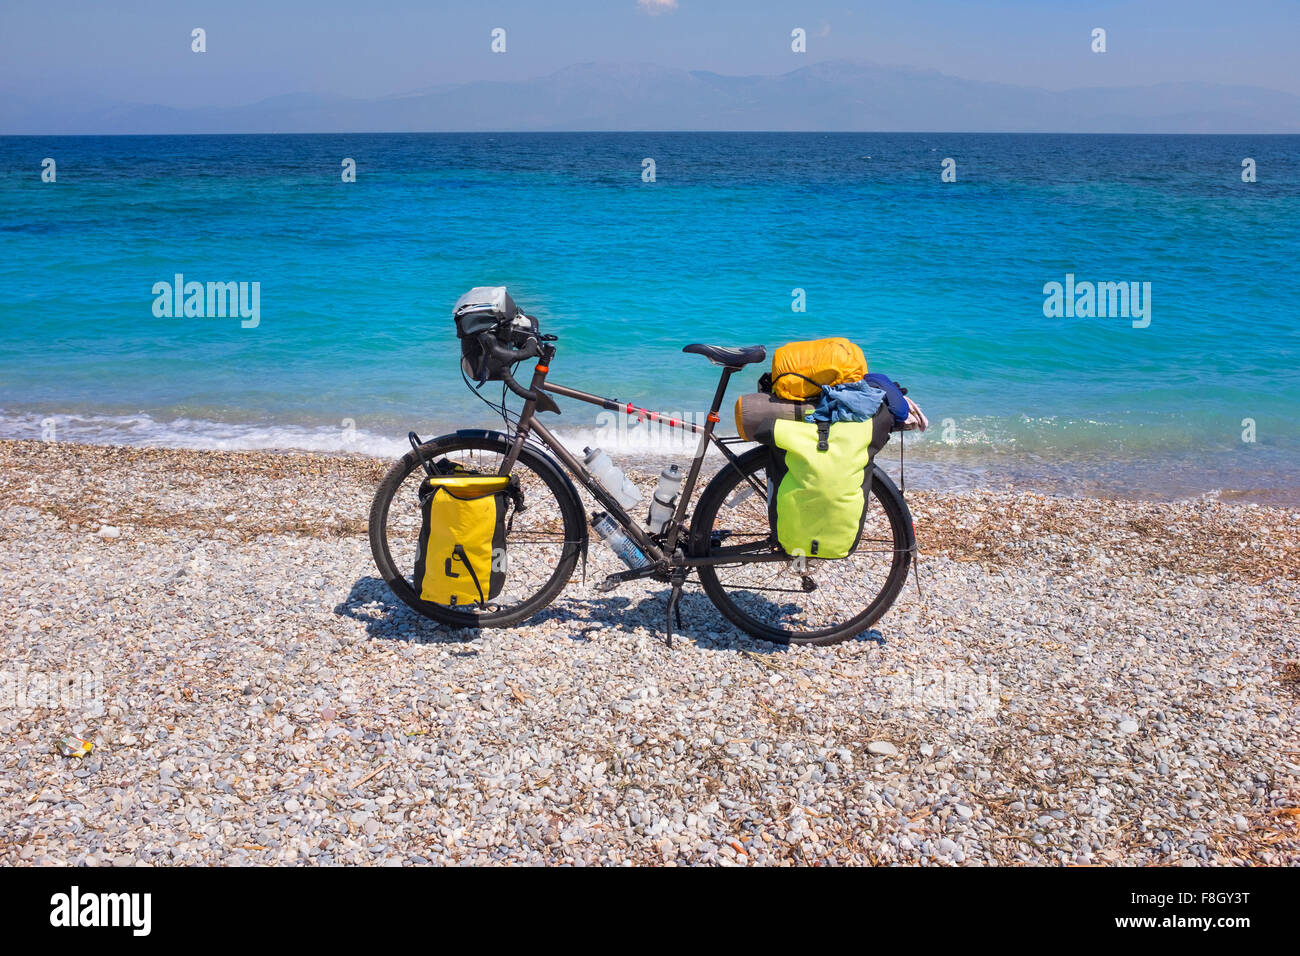 Bicycle parked on rocky beach Stock Photo